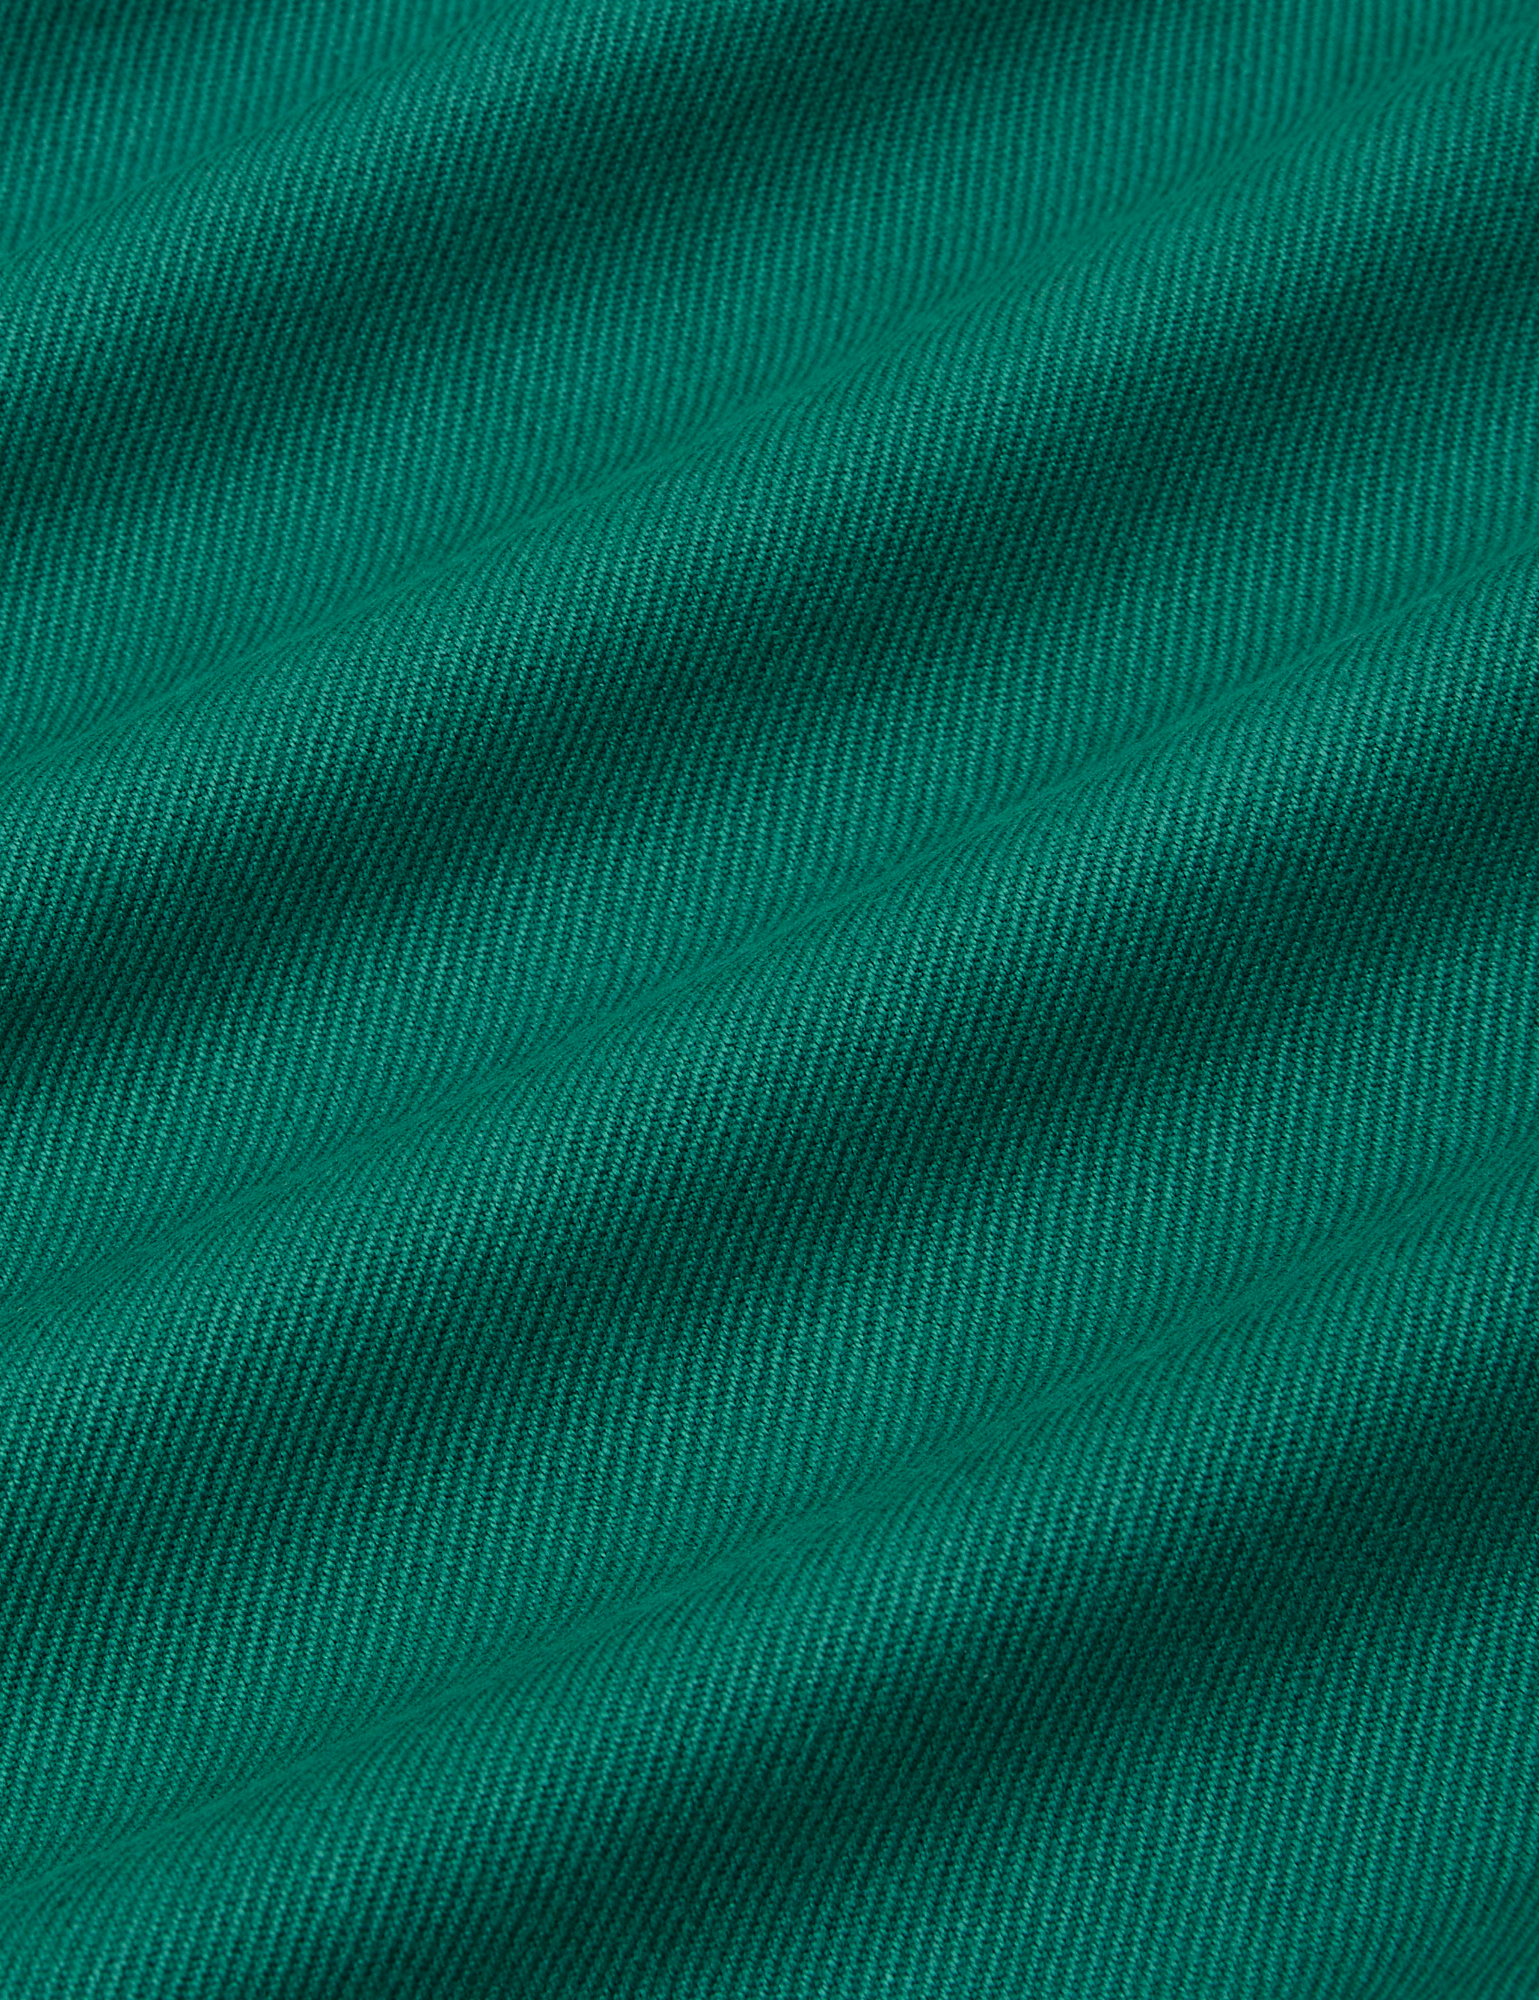 Flannel Overshirt in Hunter Green fabric detail close up